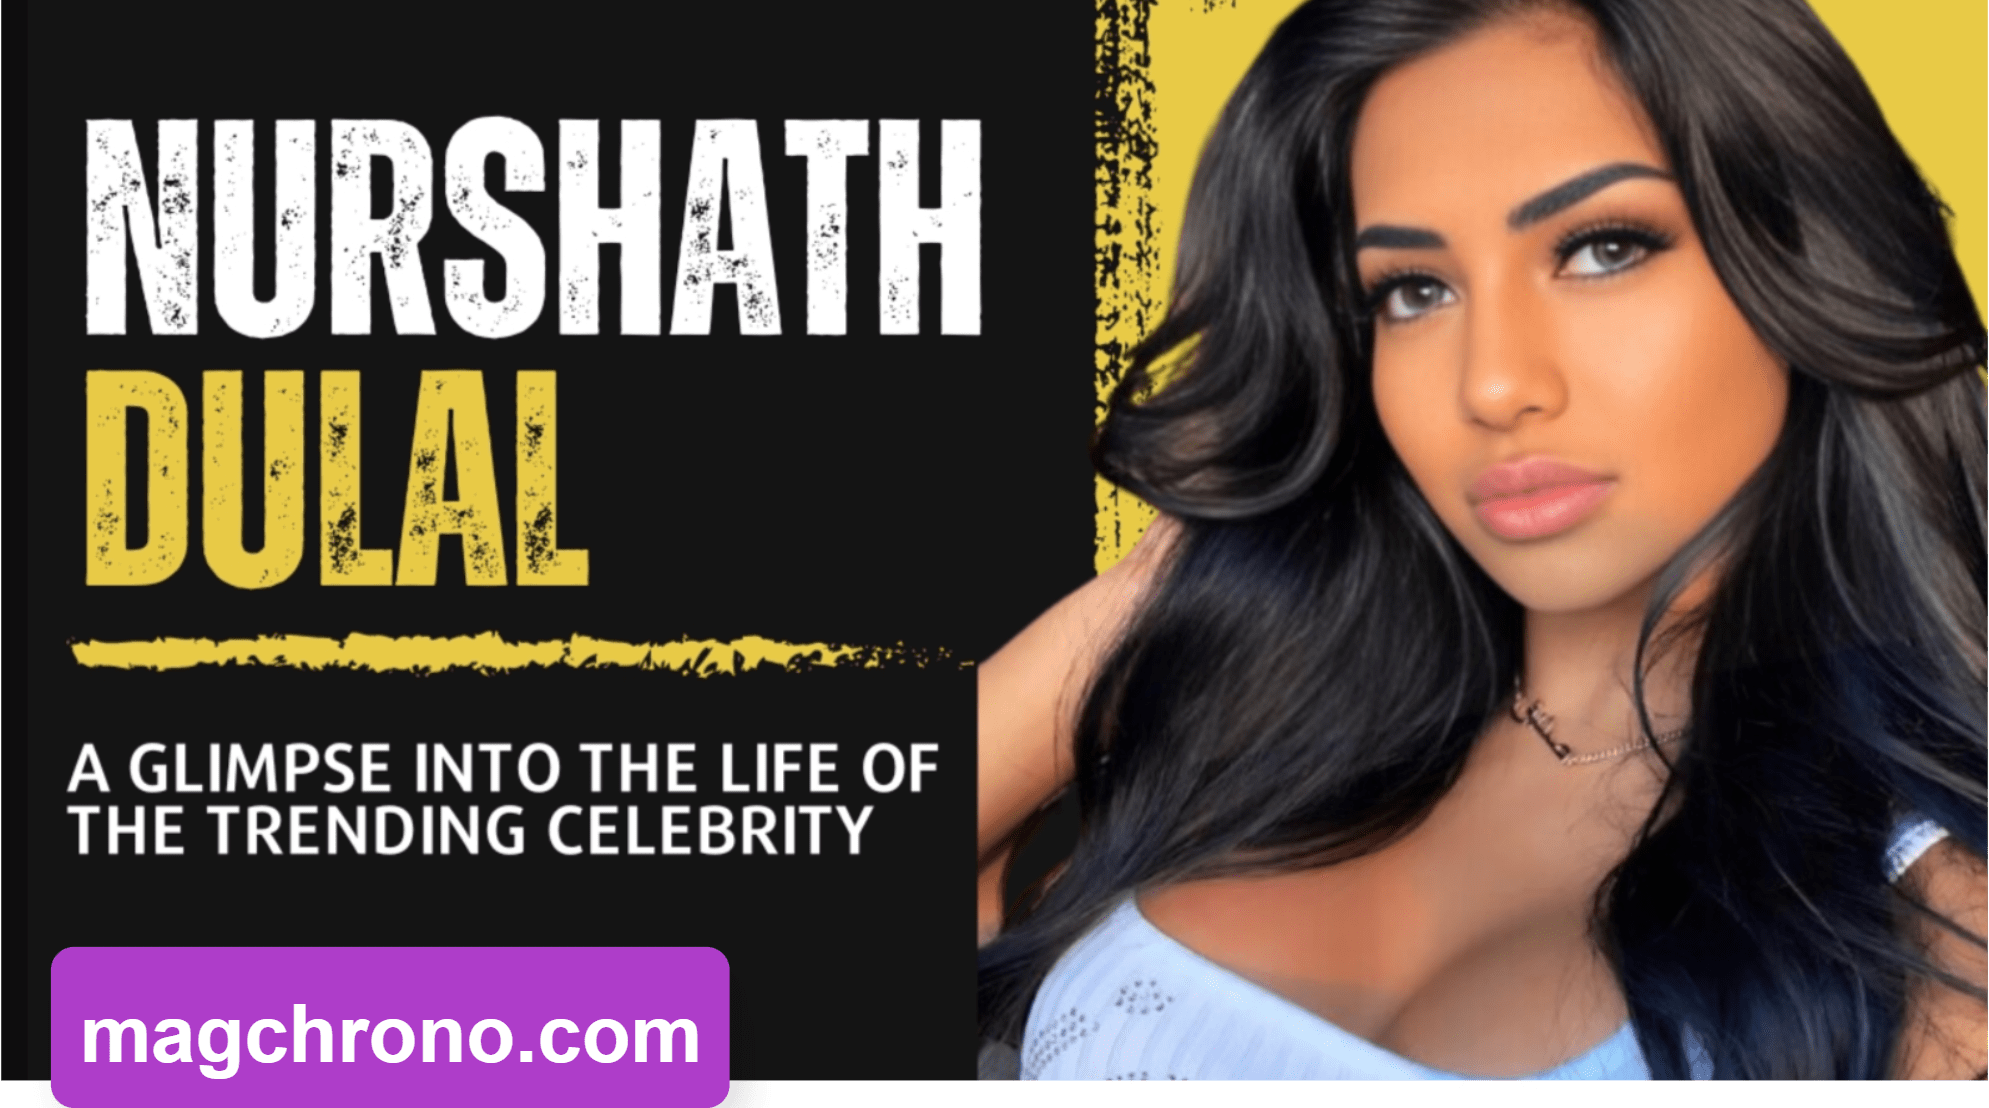 Nurshath Dulal’s Biography, Wiki, Body Stats, Career, Relationships, and Net Worth